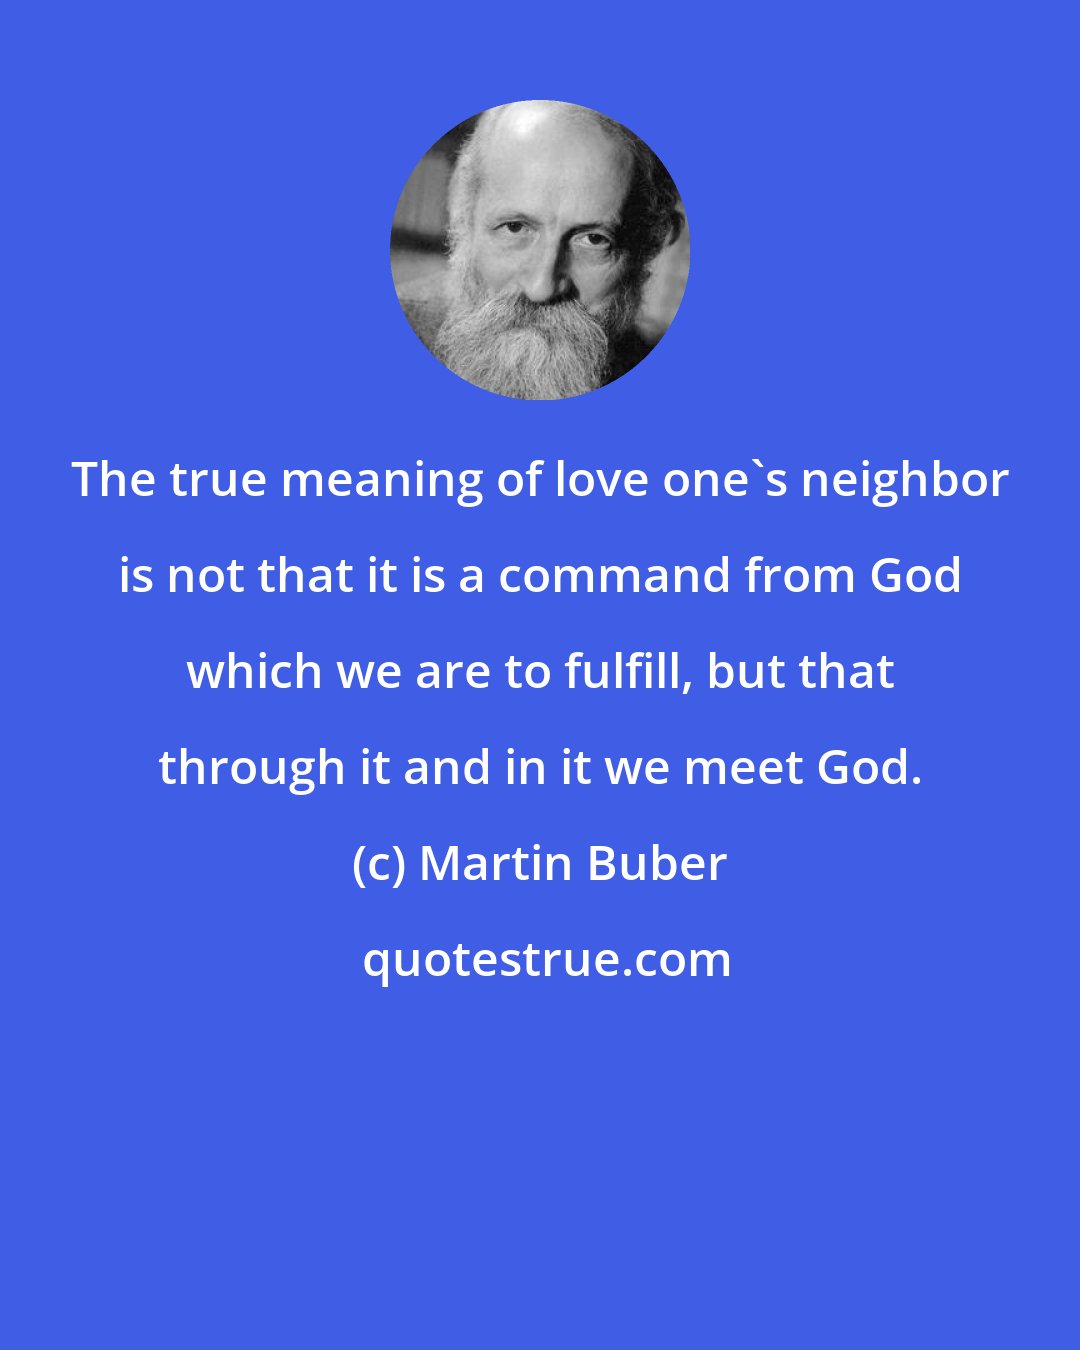 Martin Buber: The true meaning of love one's neighbor is not that it is a command from God which we are to fulfill, but that through it and in it we meet God.